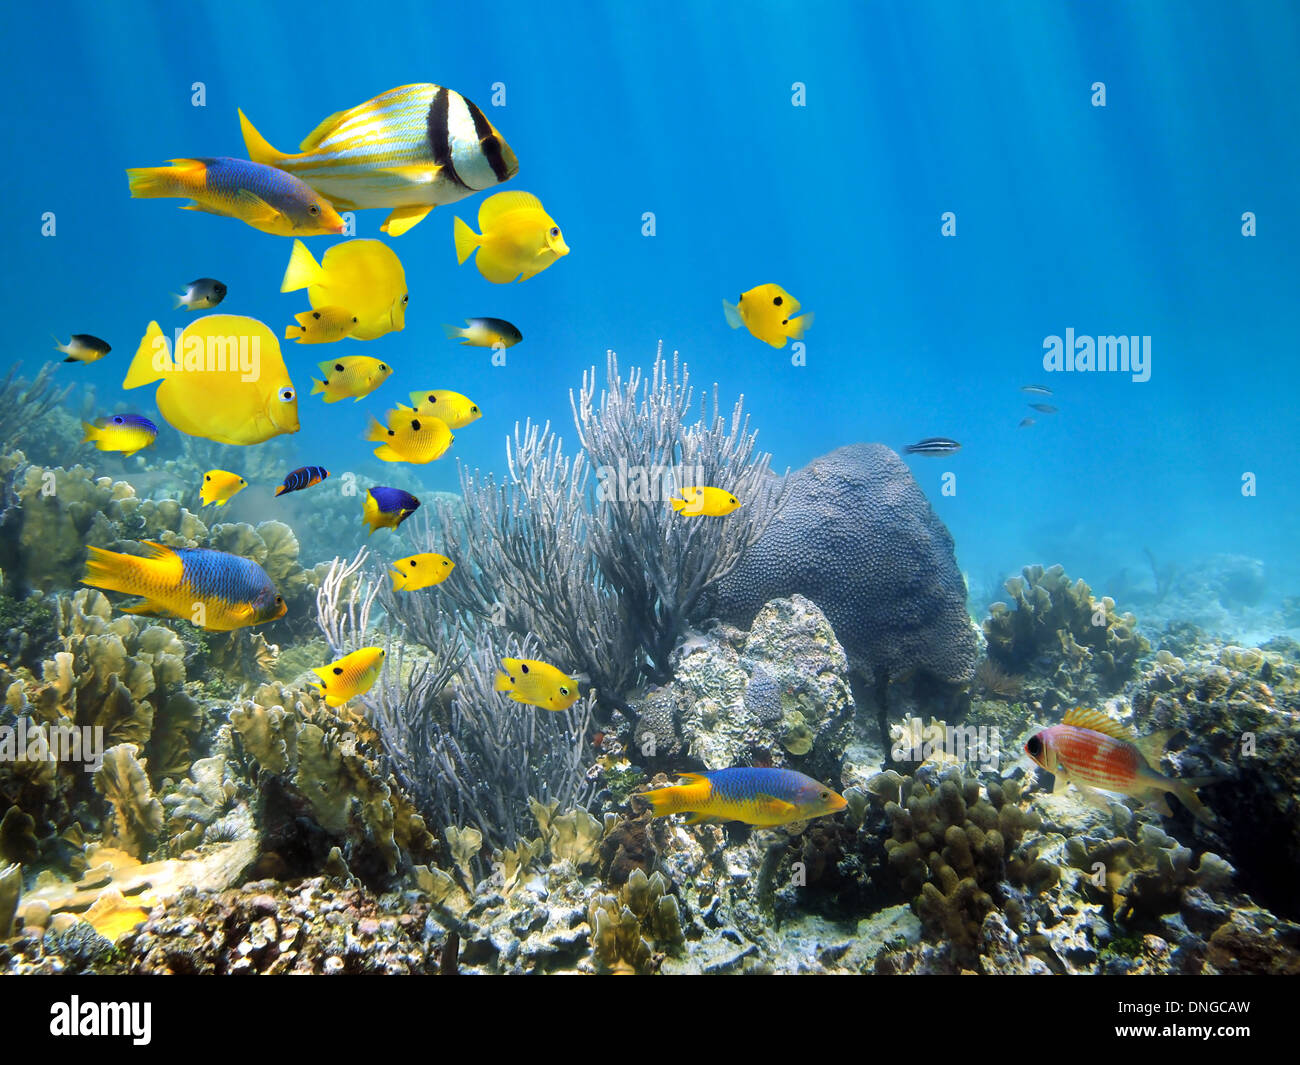 Underwater coral reef scenery with colorful school of fish Stock Photo